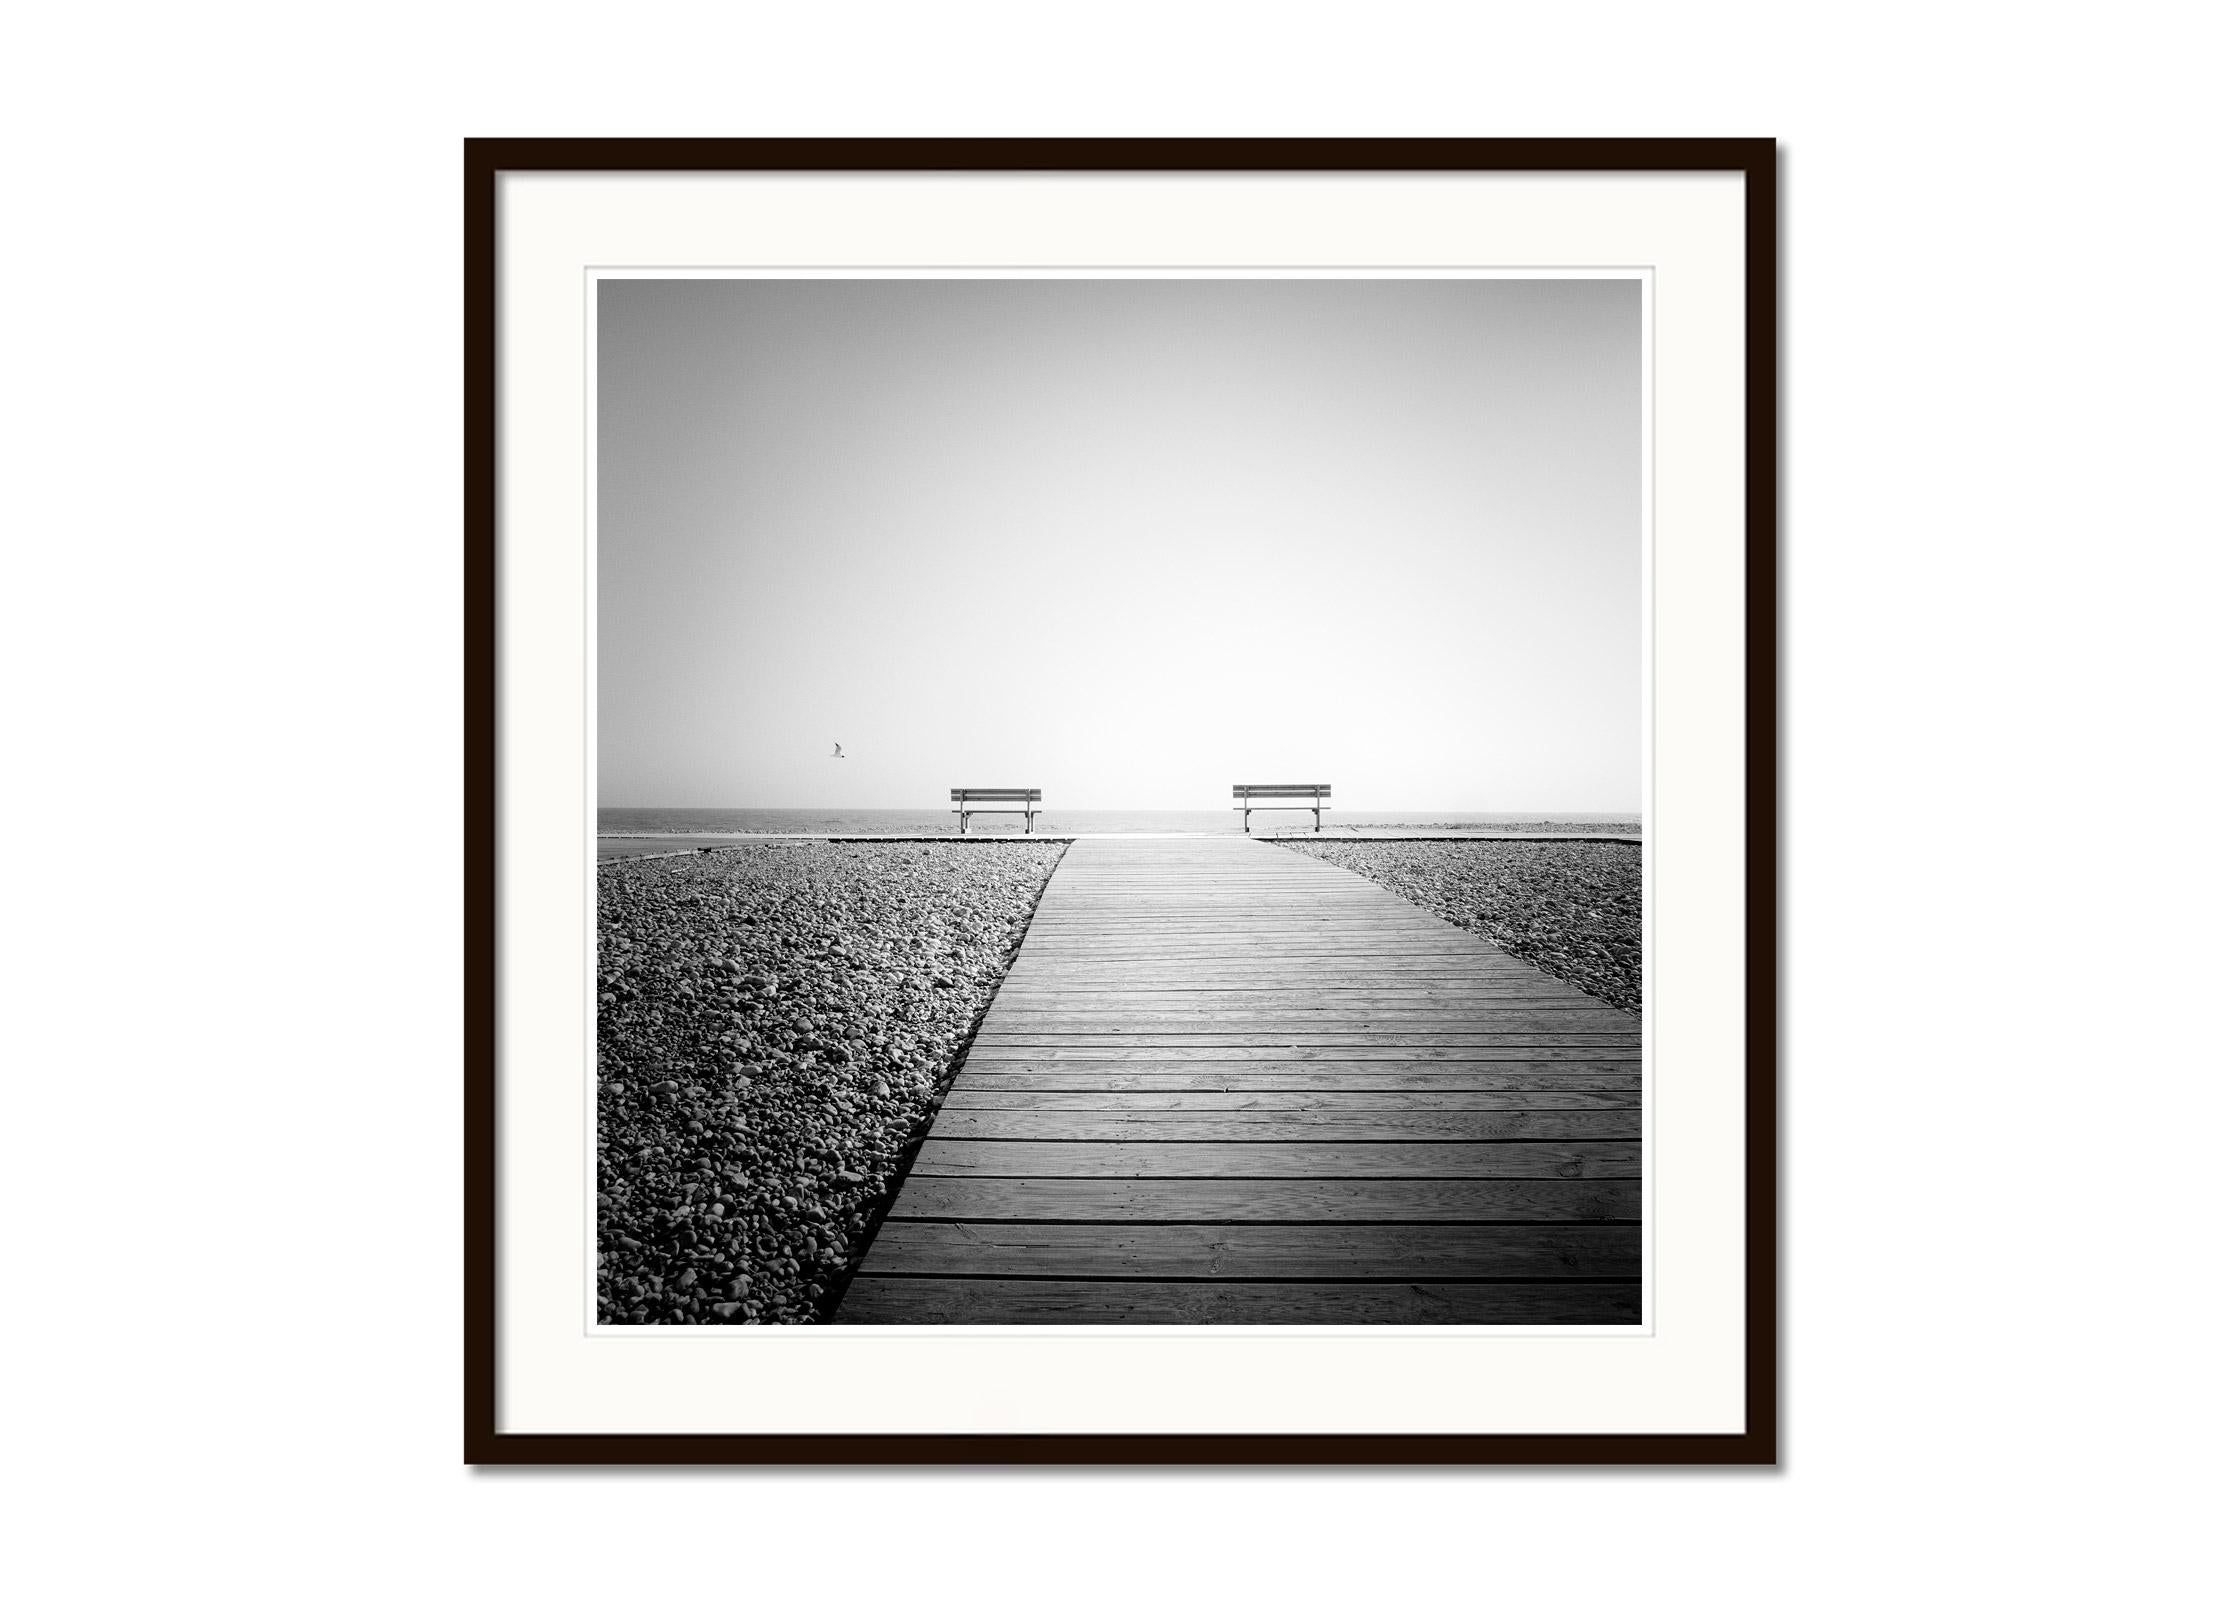 Esplanade, lonely rocky beach, France, Black and White landscape art photography - Gray Black and White Photograph by Gerald Berghammer